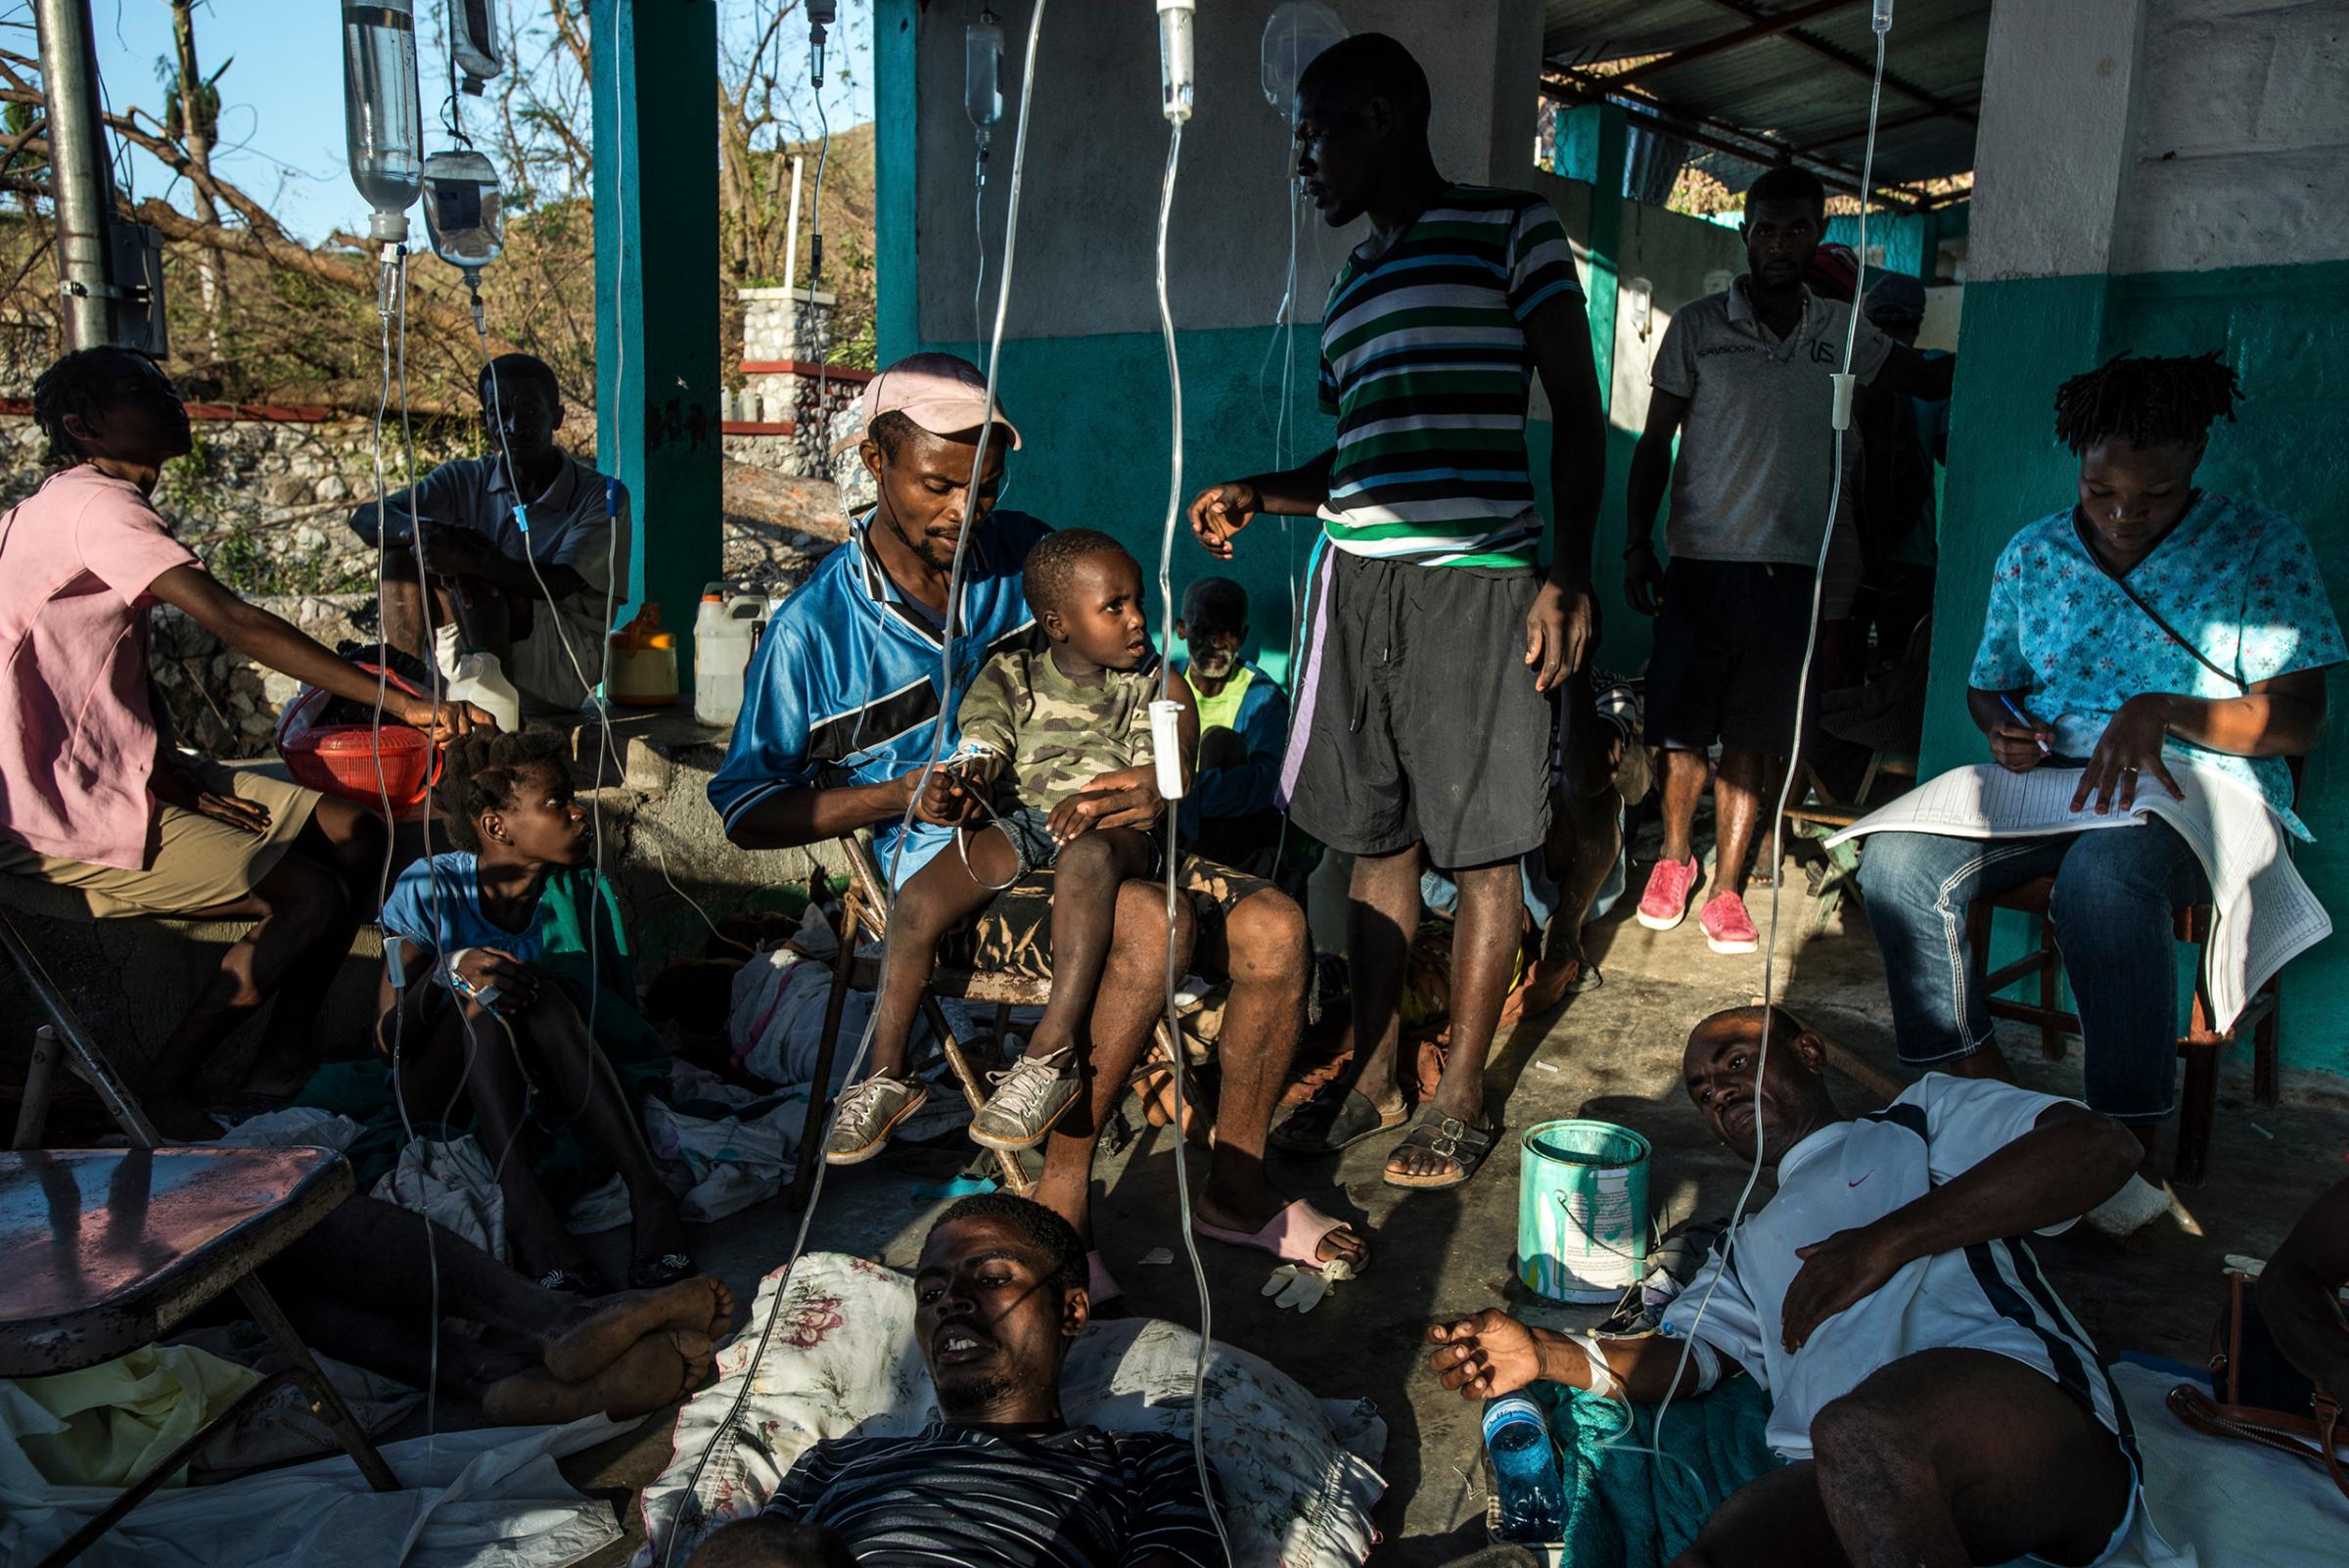 Patients with symptoms of cholera with their families, who risk getting sick caring for their loved ones, at a small clinic in Rendel, Haiti, on Oct. 12, 2016. The town of Rendel and its surroundings, which once sheltered 25,000 people, are the epicenter of a potential Cholera disaster in Haiti made worse by the recent destruction caused by the storm.